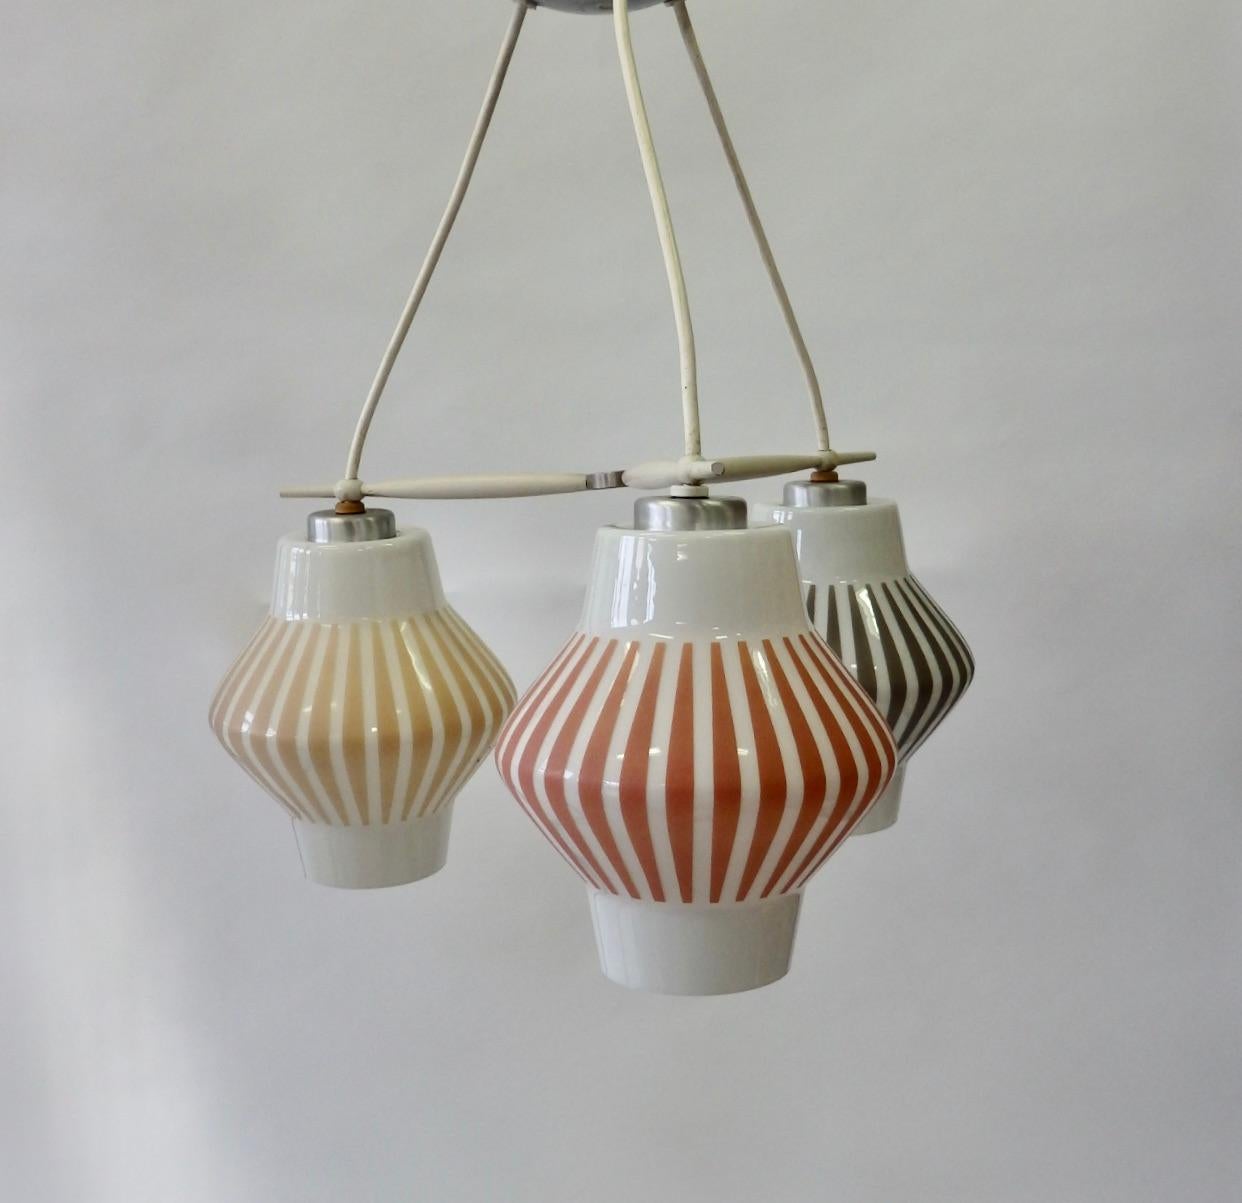 Midcentury Multicolored 3 Globe Hanging Ceiling Light Fixture In Good Condition For Sale In Ferndale, MI